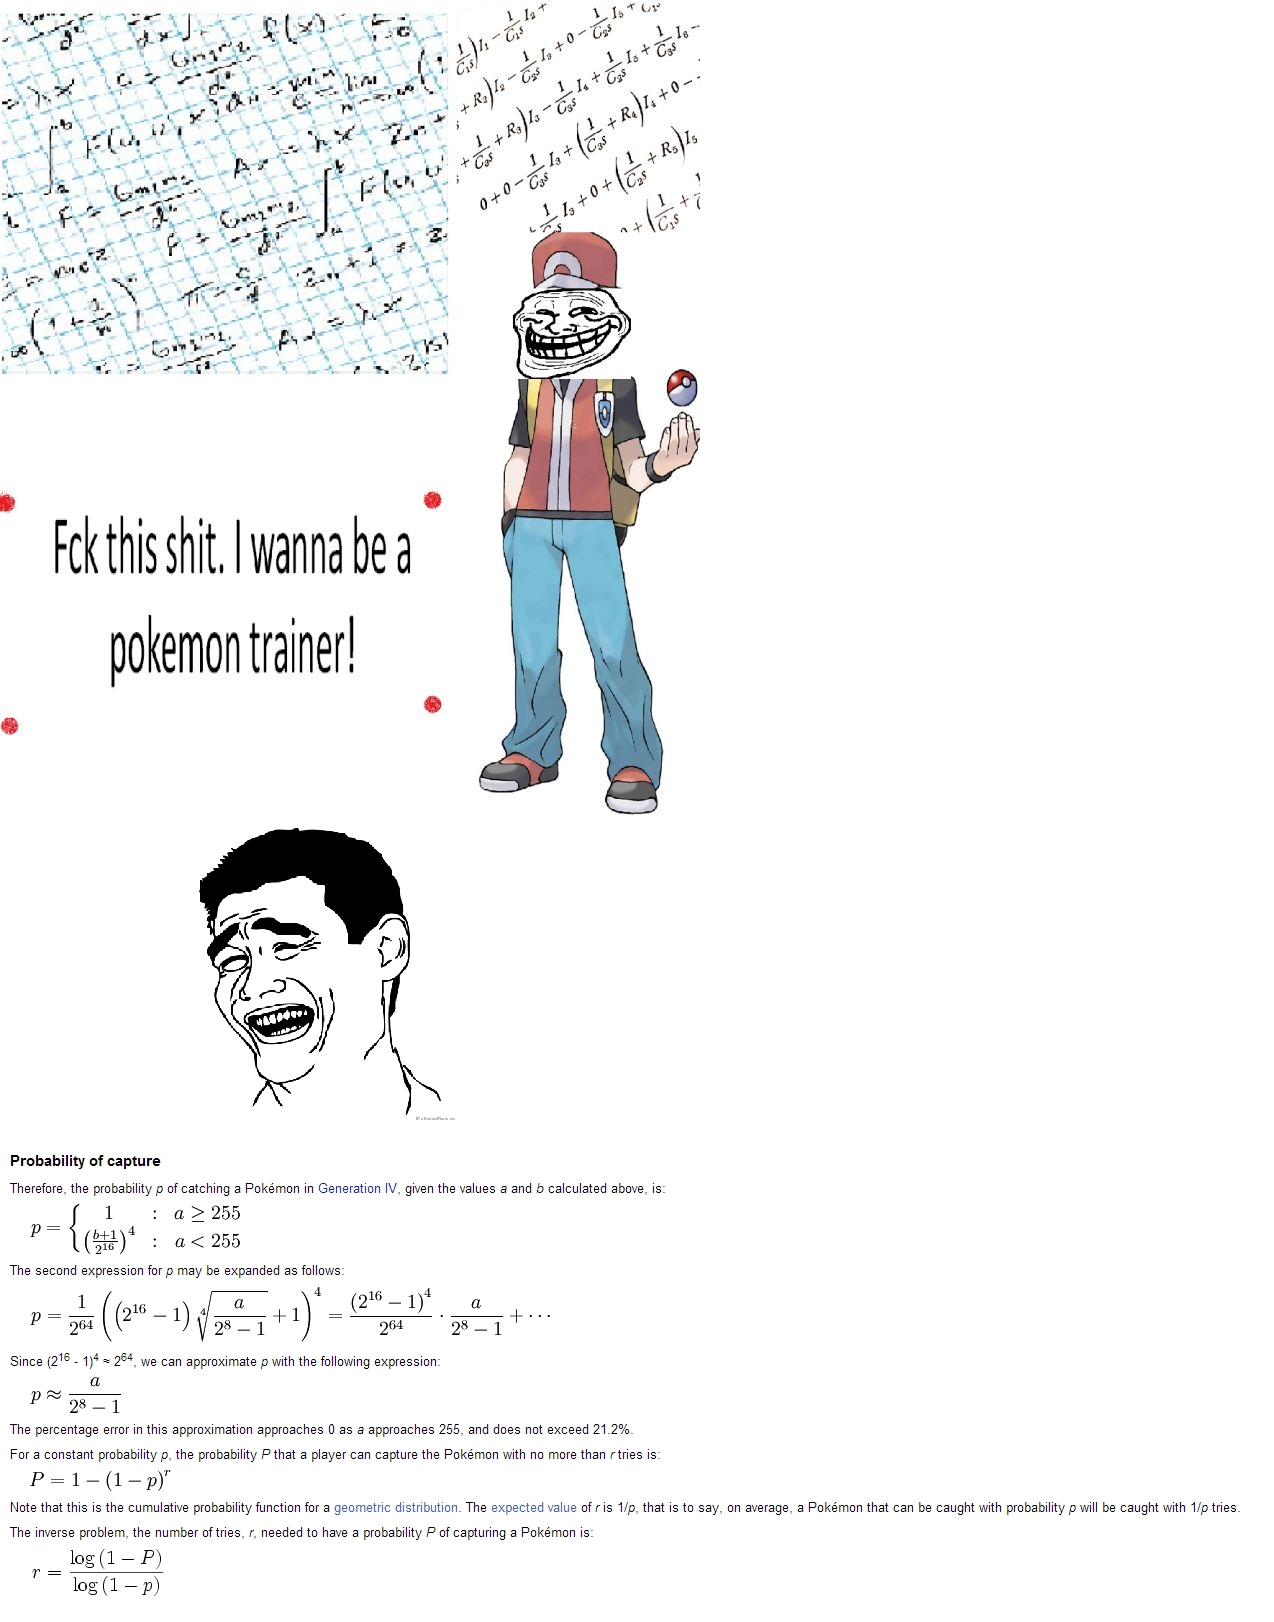 Pokemon's math is complicated too Dx